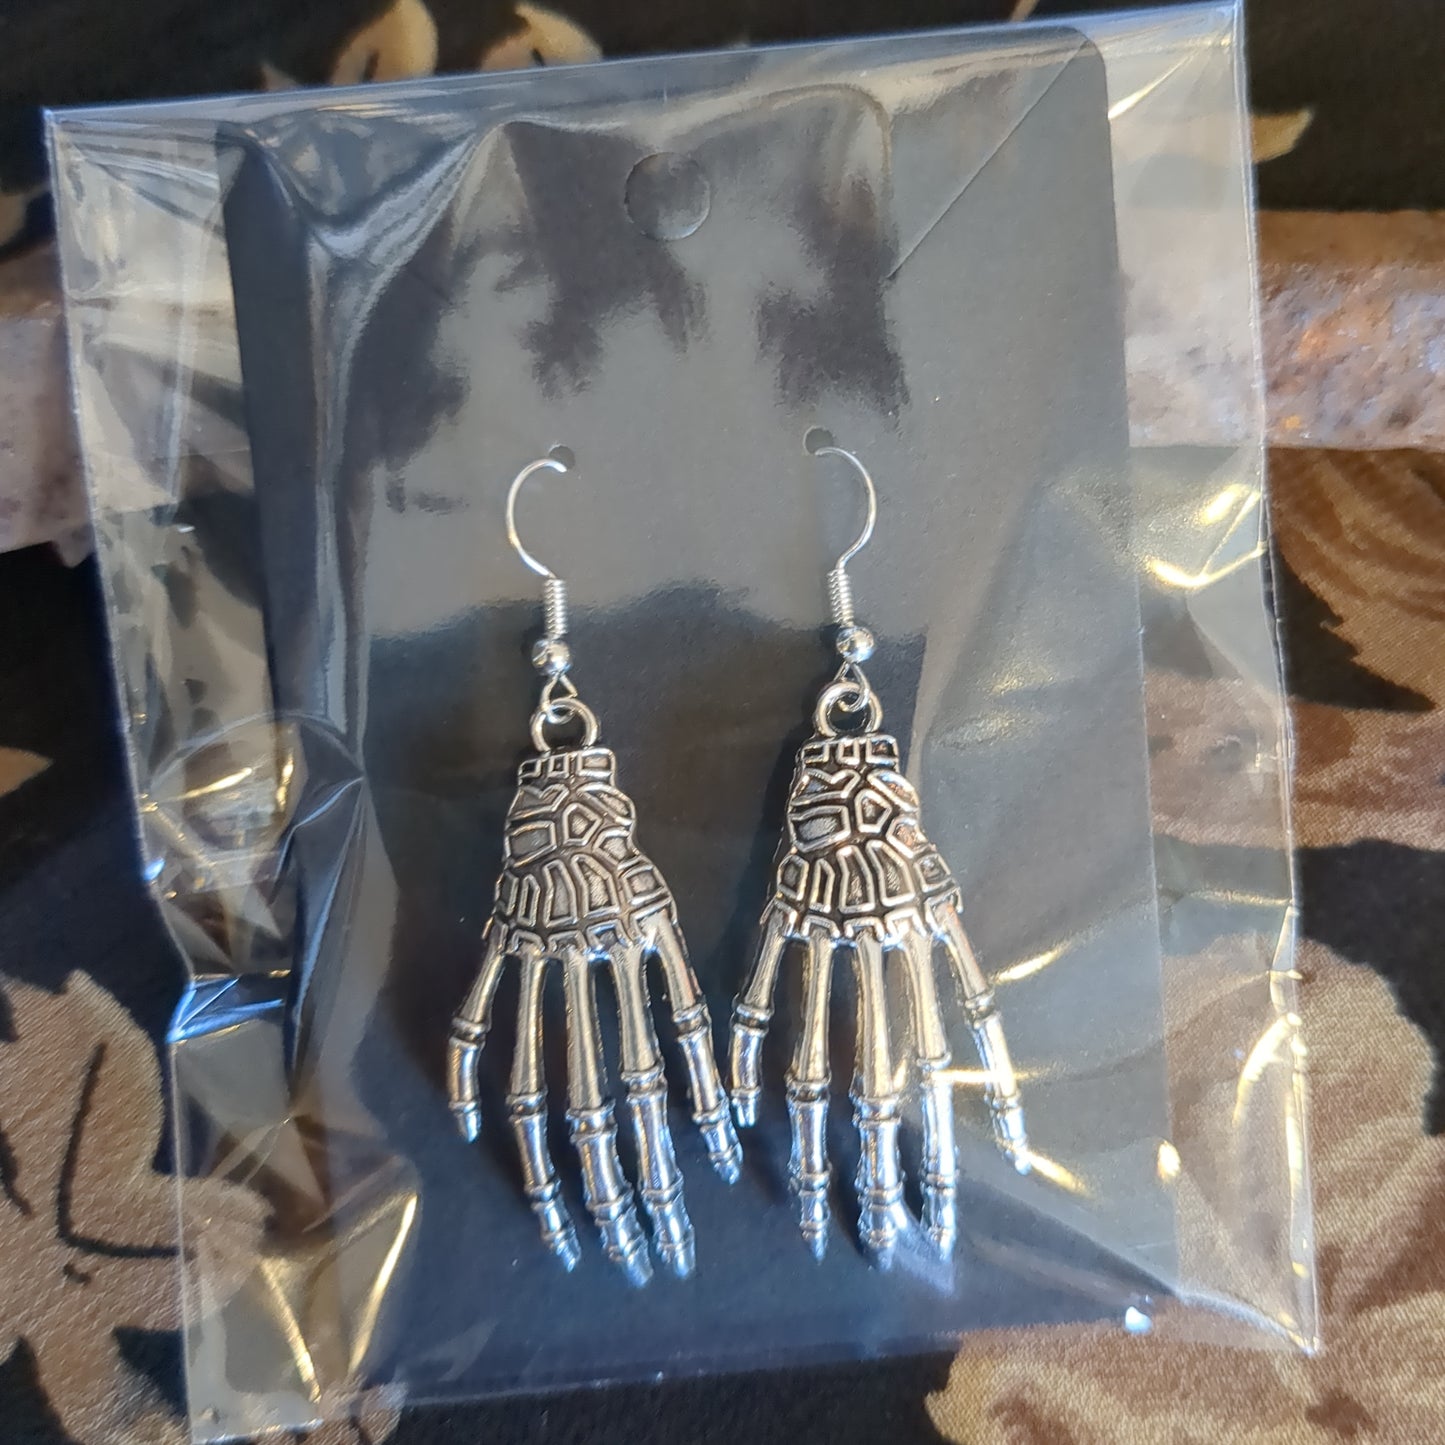 Skeleton jewelry earrings and necklaces